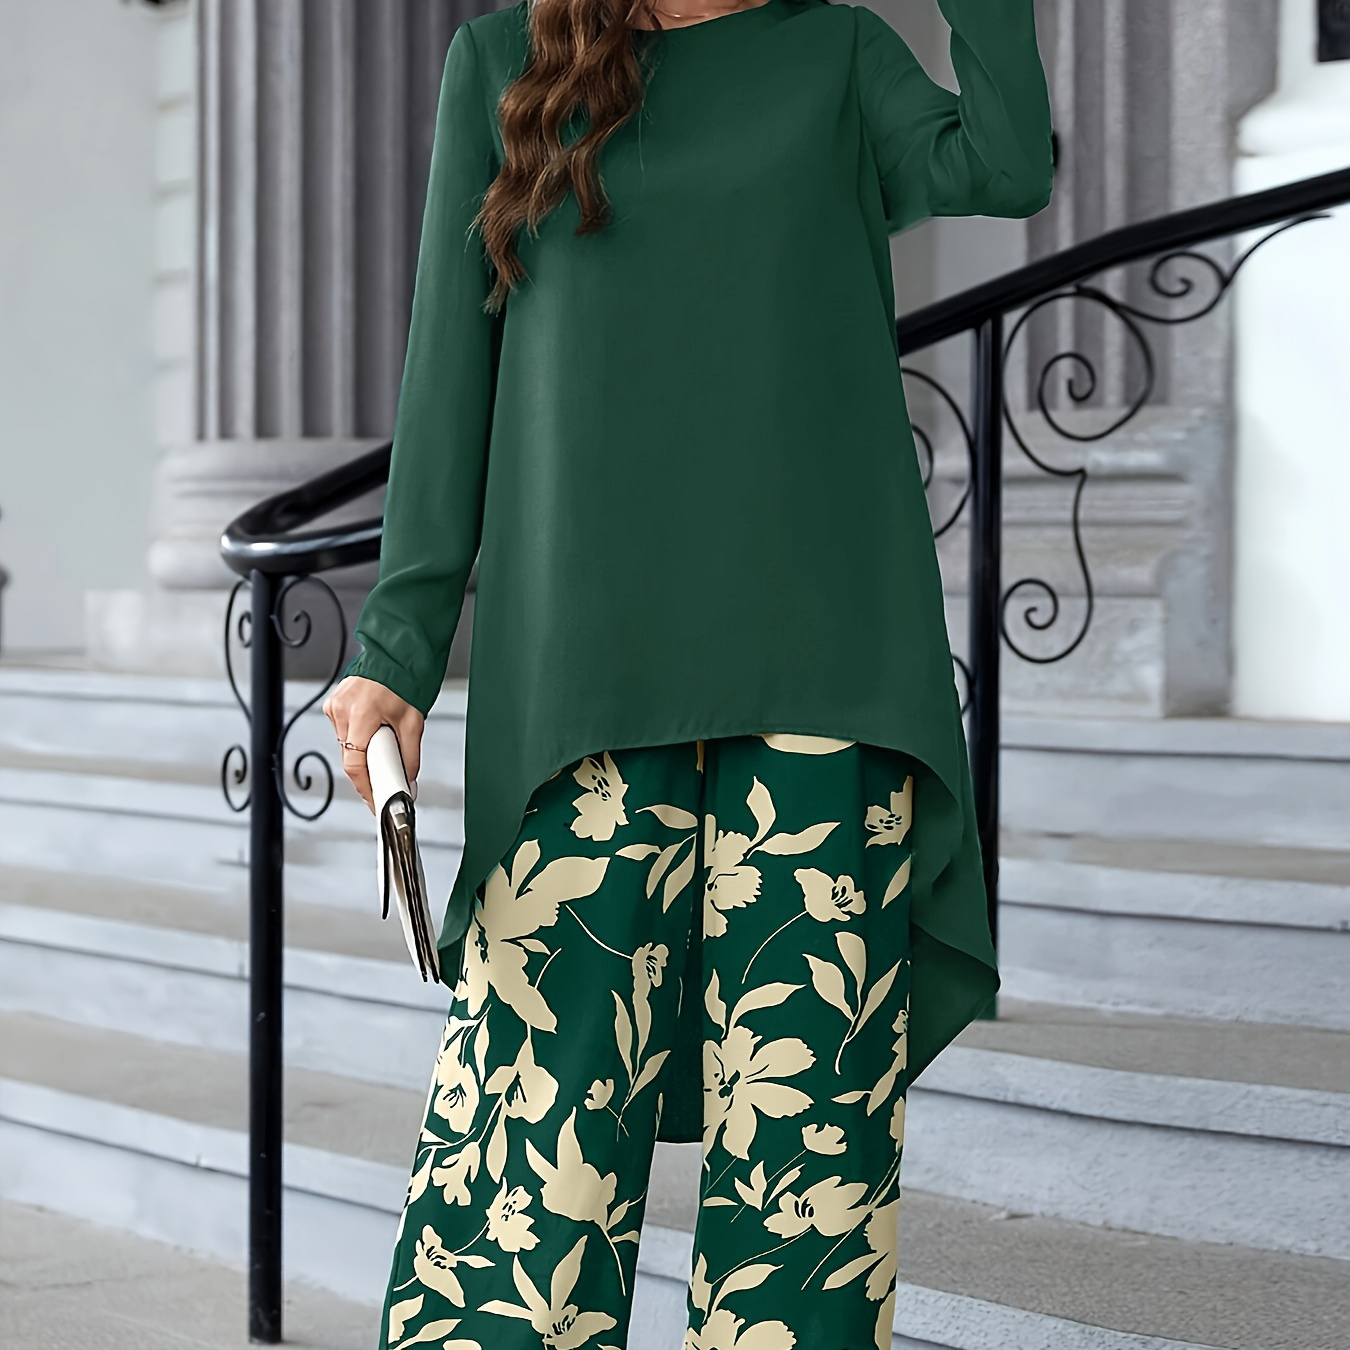 

Elegant 2 Piece Set, Solid High Low Hem Long Sleeve Crew Neck Top & Floral Print Wide Leg Pants Outfits For Spring & Fall, Women's Clothing